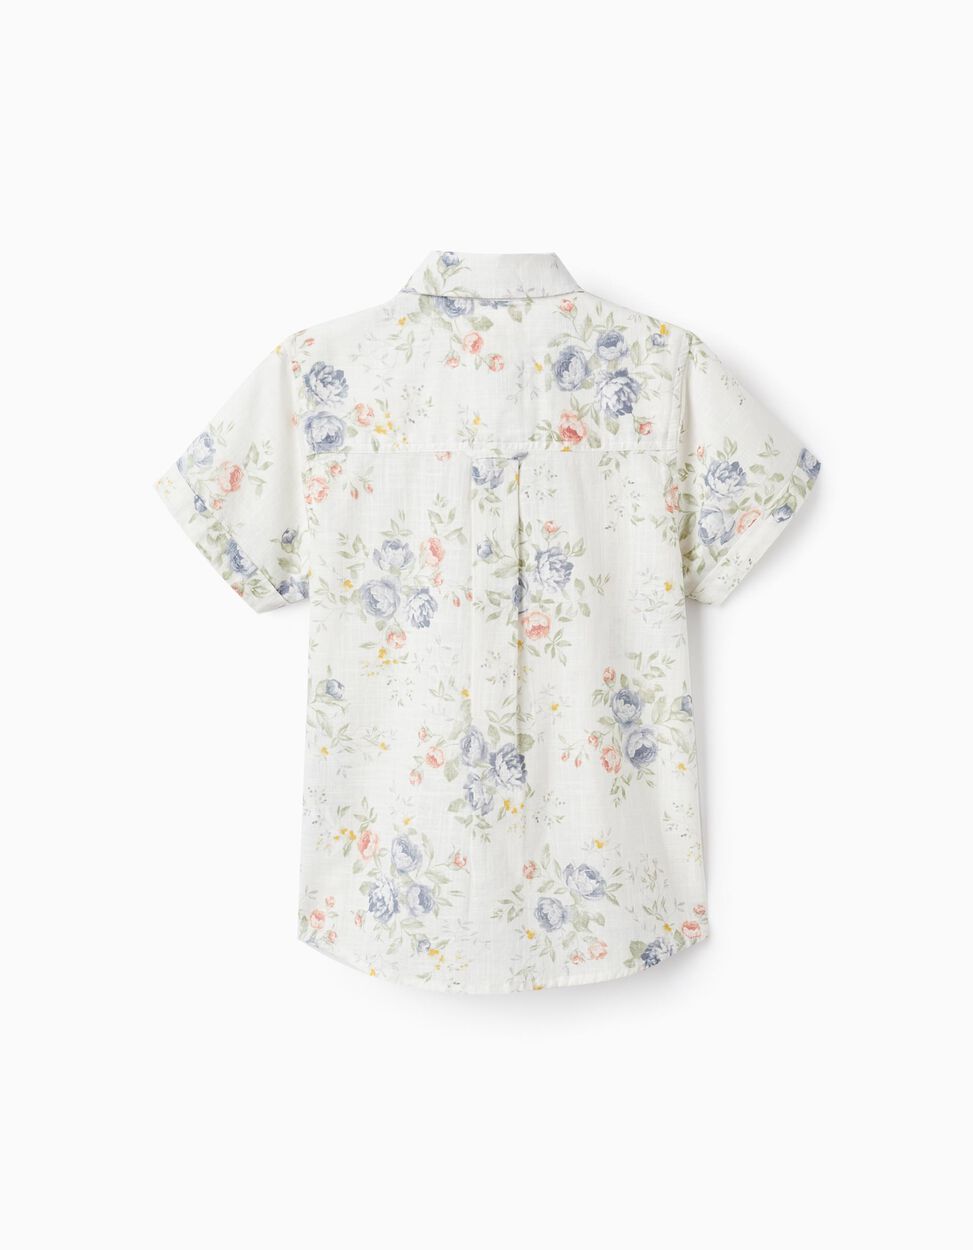 Buy Online Floral Cotton Shirt for Boys 'B&S', White